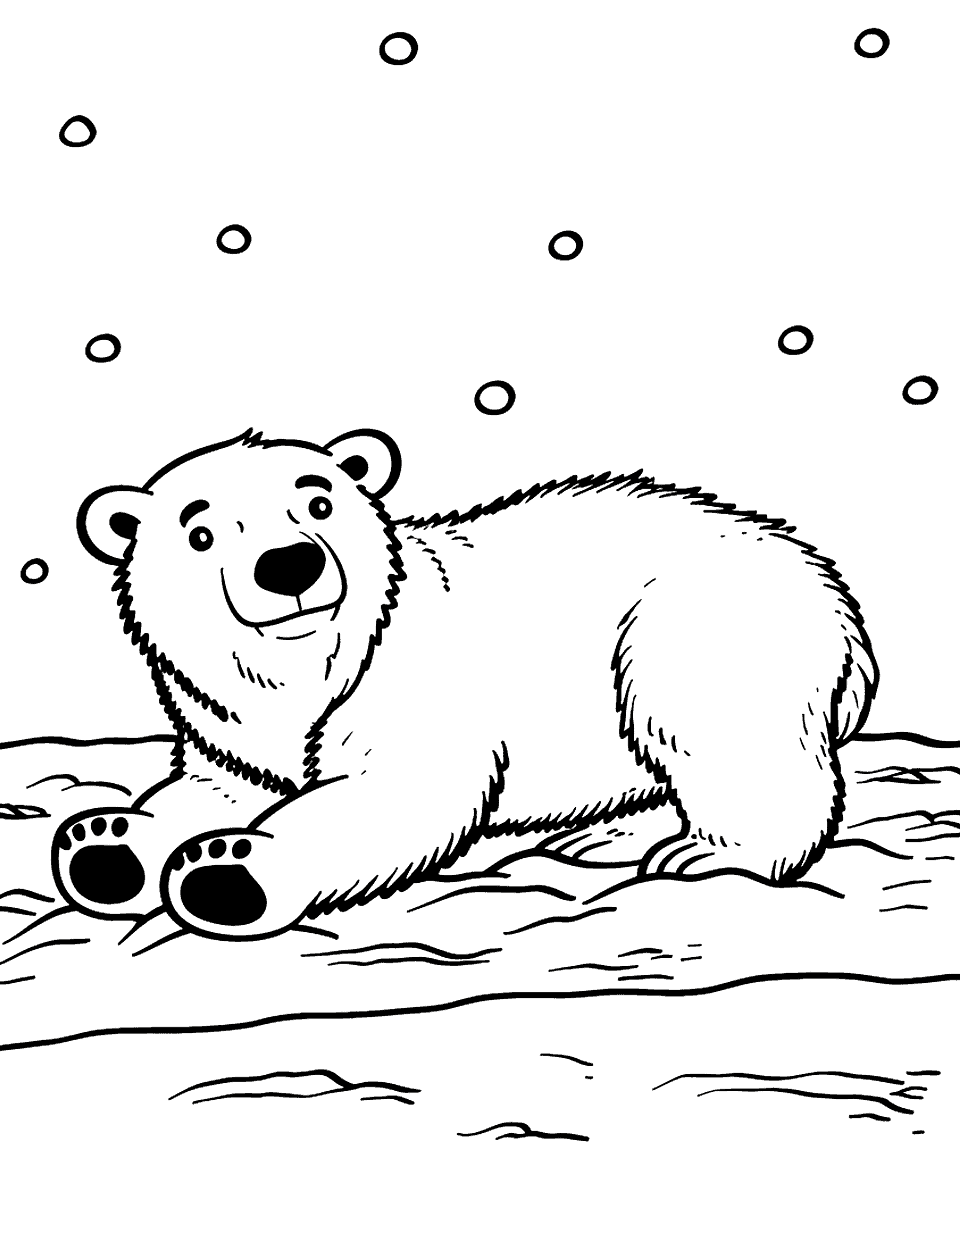 Happy Polar Bear Playing Coloring Page - A joyful polar bear playfully going around in the snow.